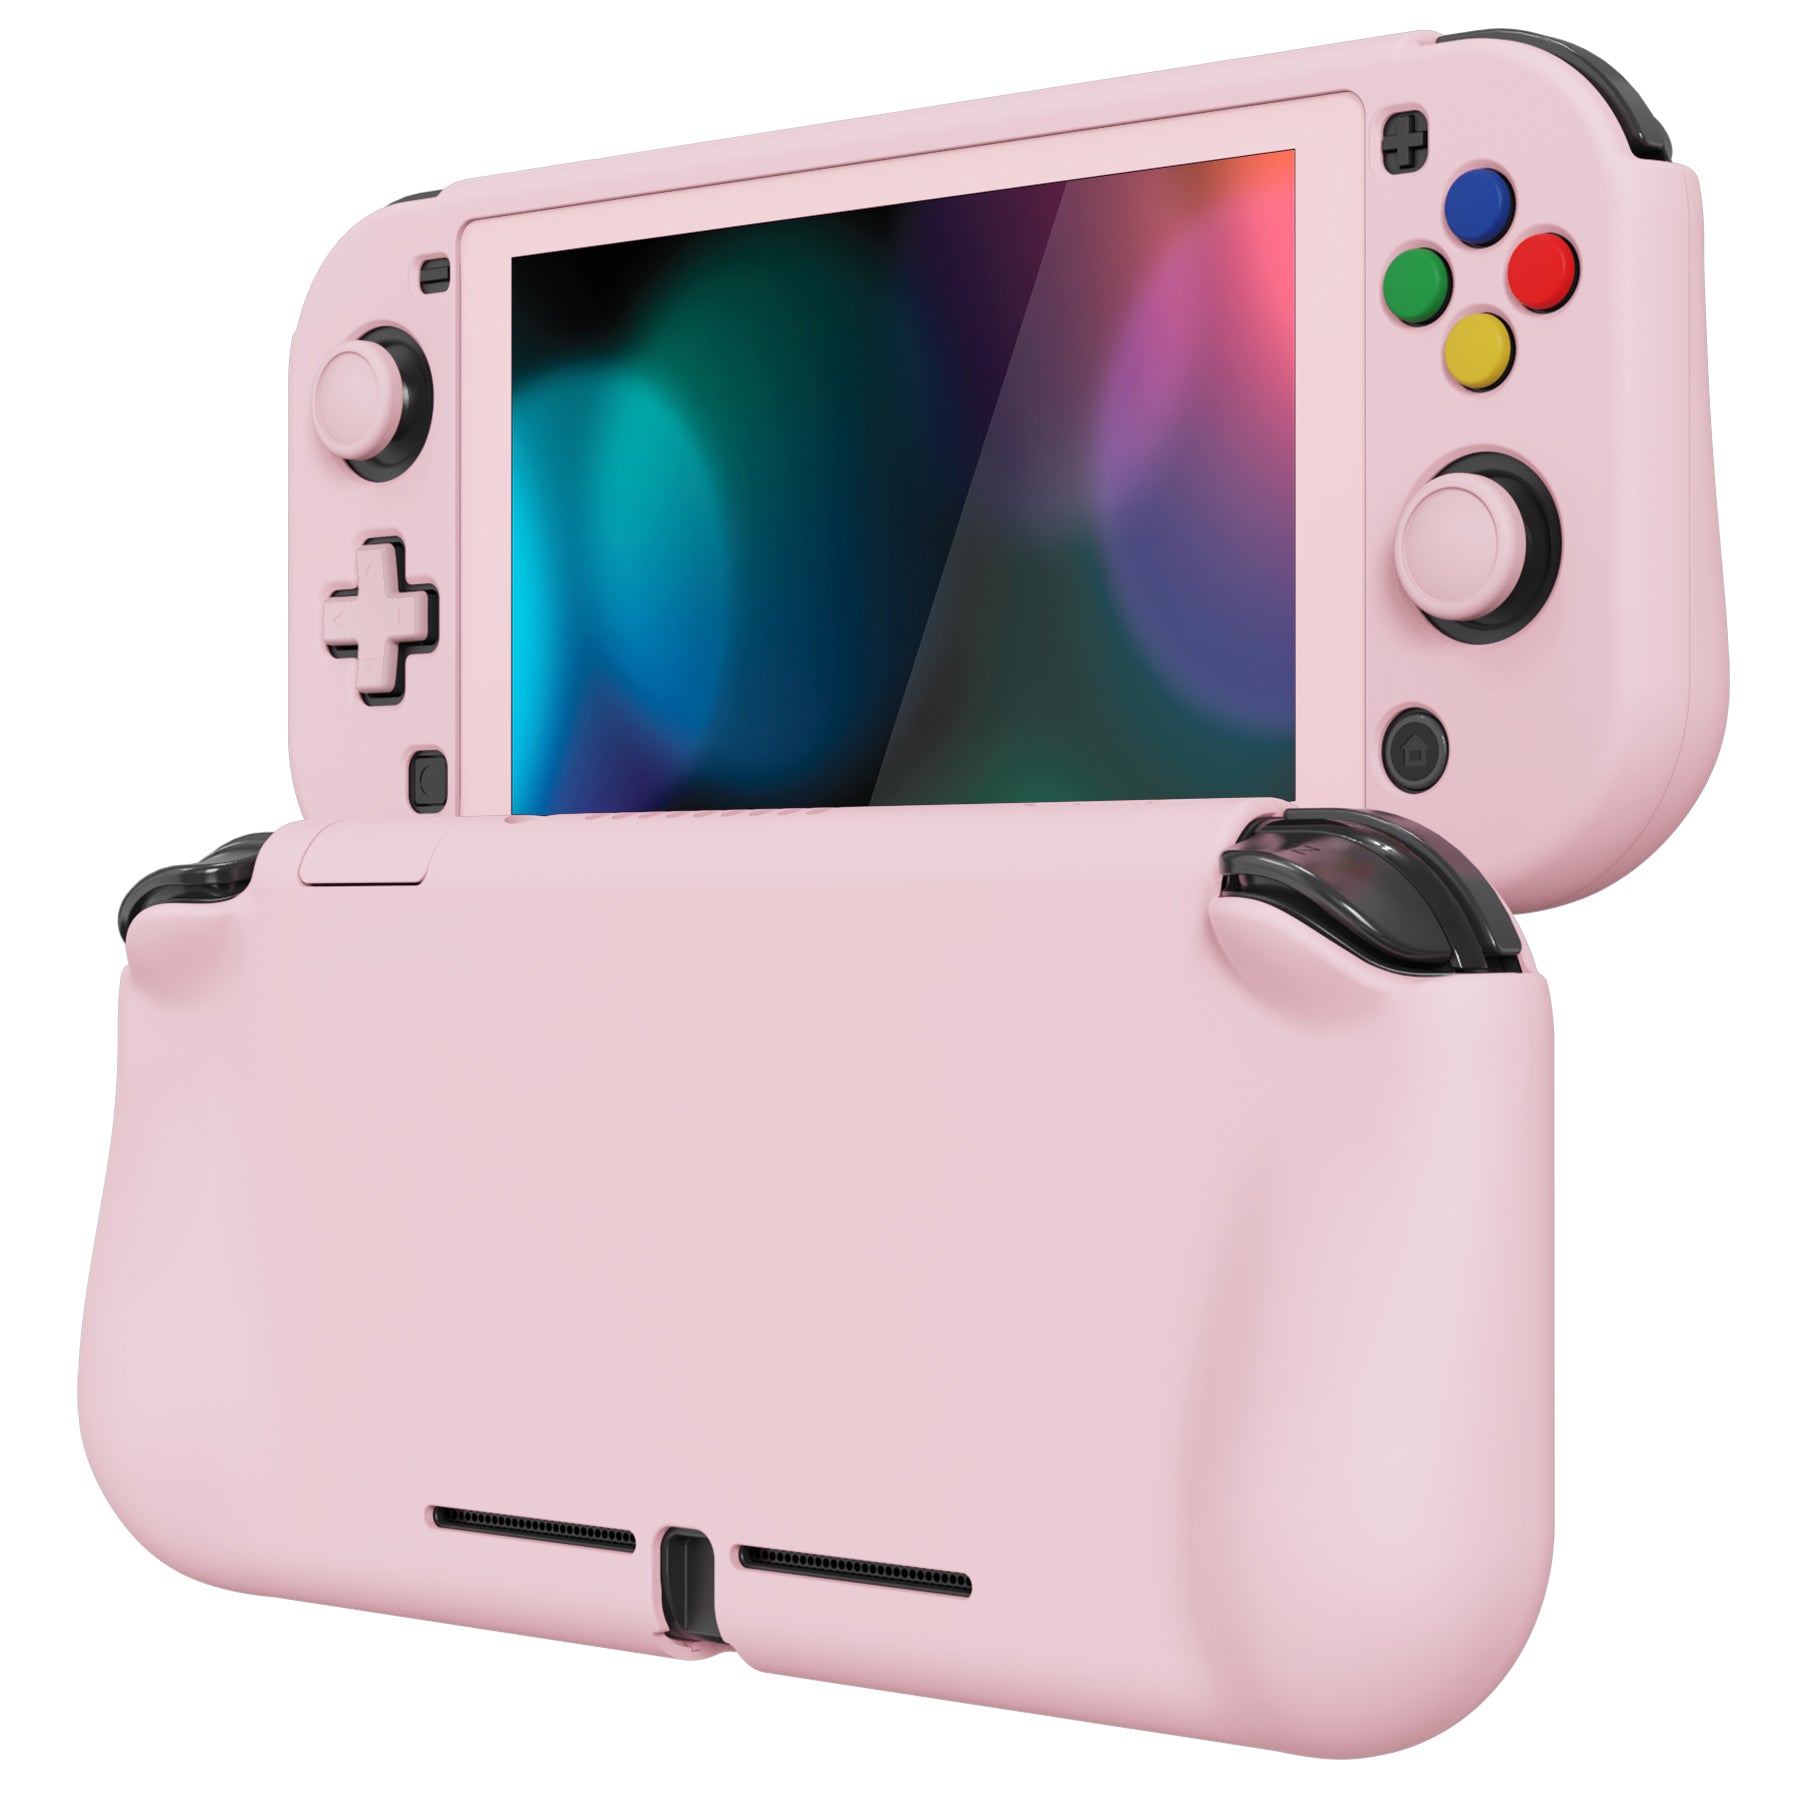 Heldig Protective Case for Nintendo Switch Lite, Premium PC Hard Cover Case  Shock-Absorption Anti-Scratch Compatible with Nintendo Lite with 4 Thumb  Grip Caps 